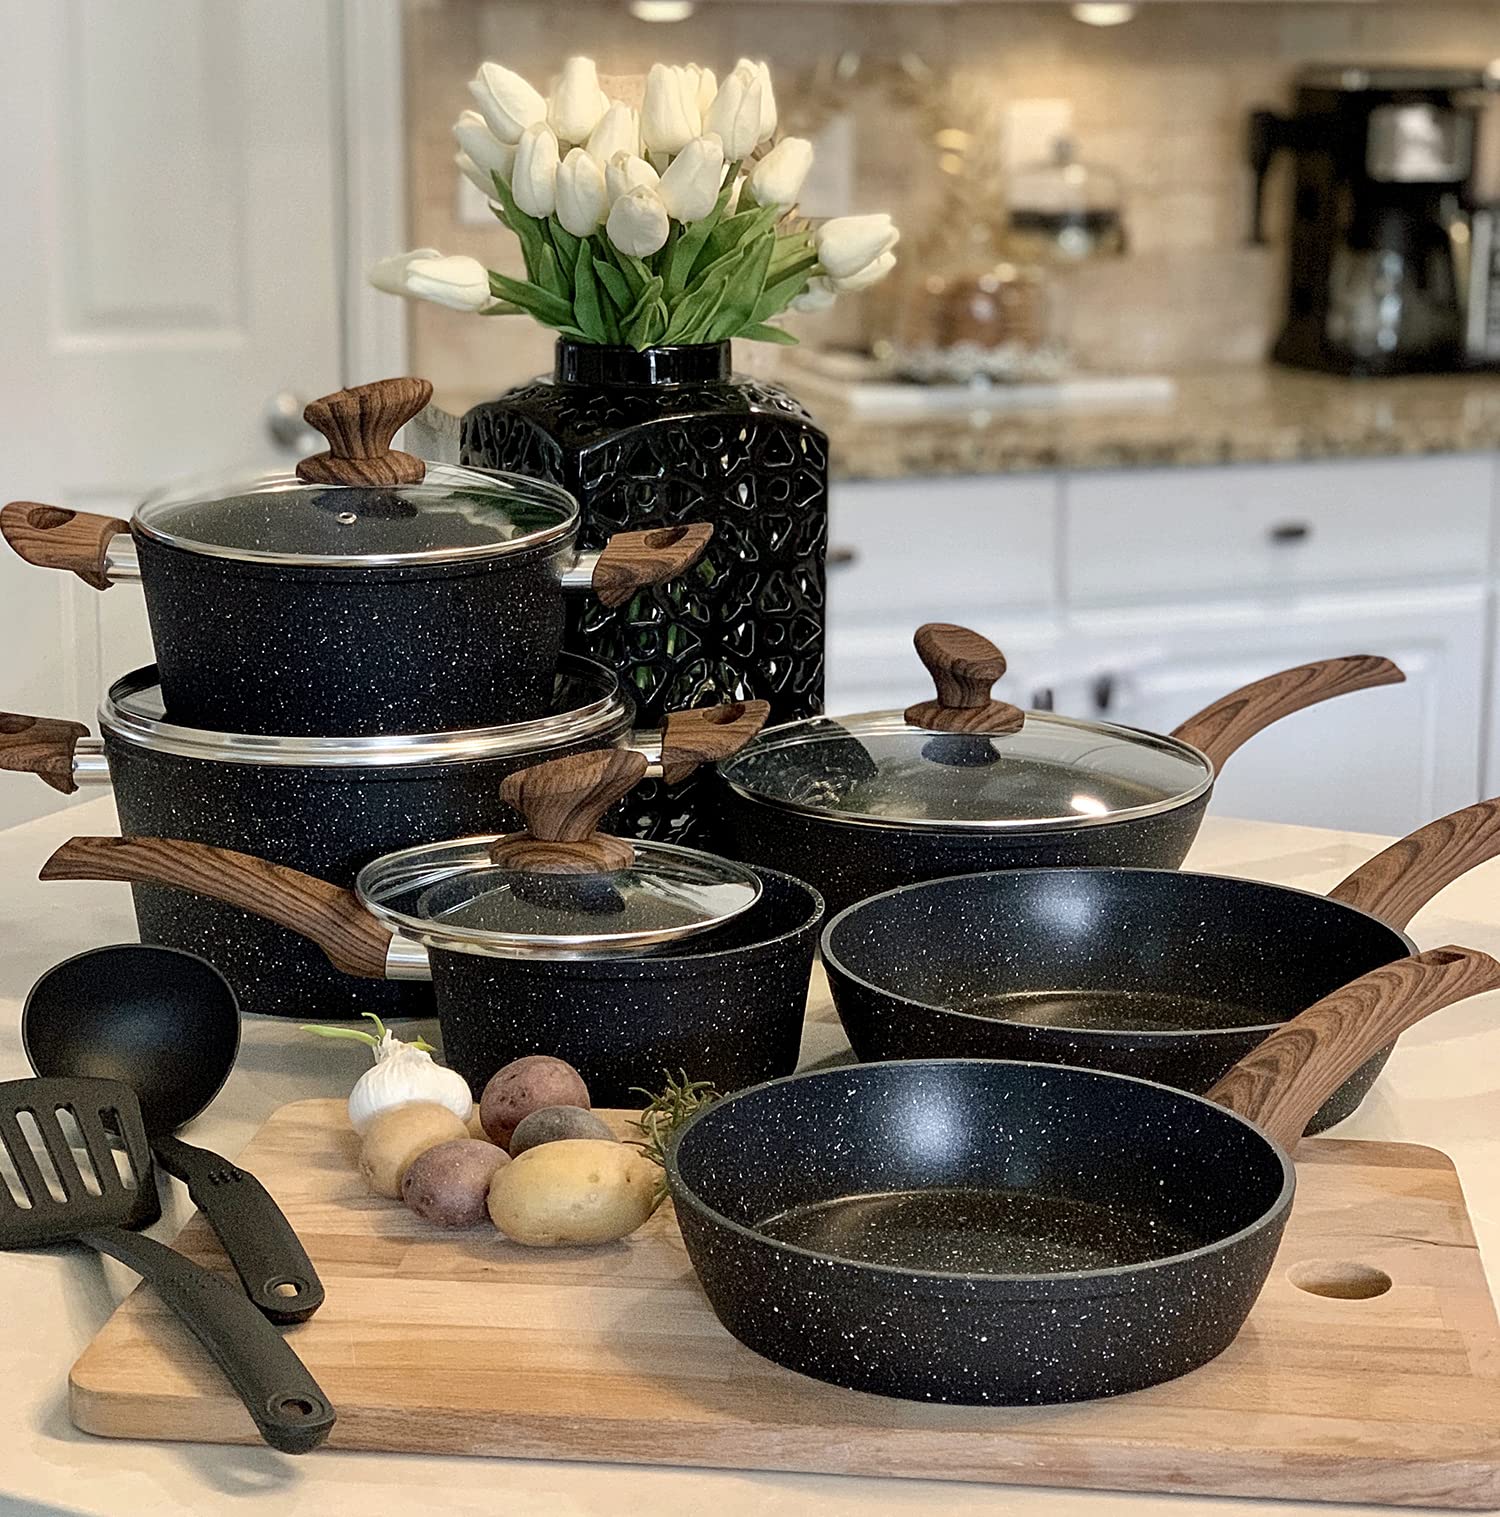 GreenLife's Best-Selling Cookware Set Is Under $80 This Prime Day – SheKnows